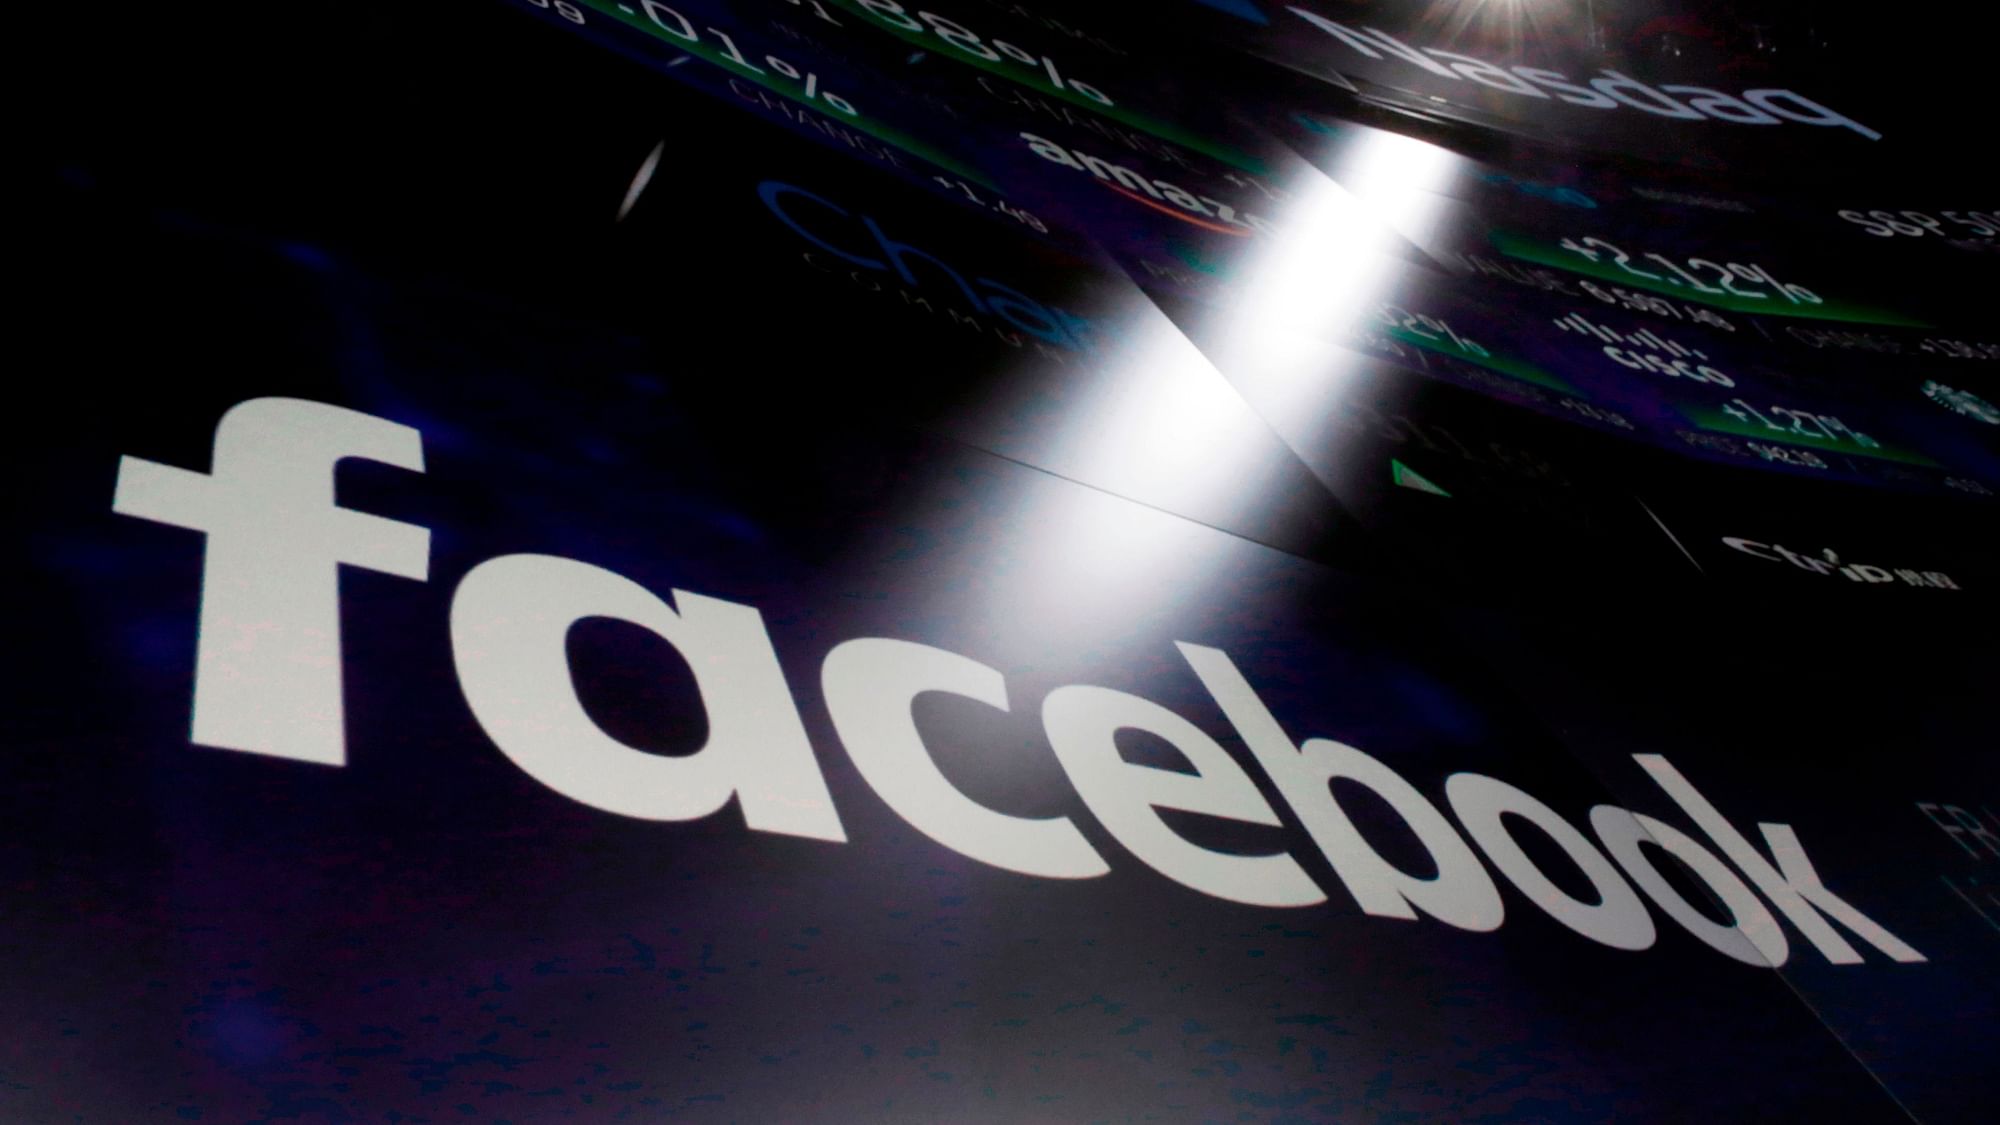 The federal government charged Facebook  for allegedly allowing landlords and real estate brokers to systematically exclude groups from seeing ads for houses and apartments.